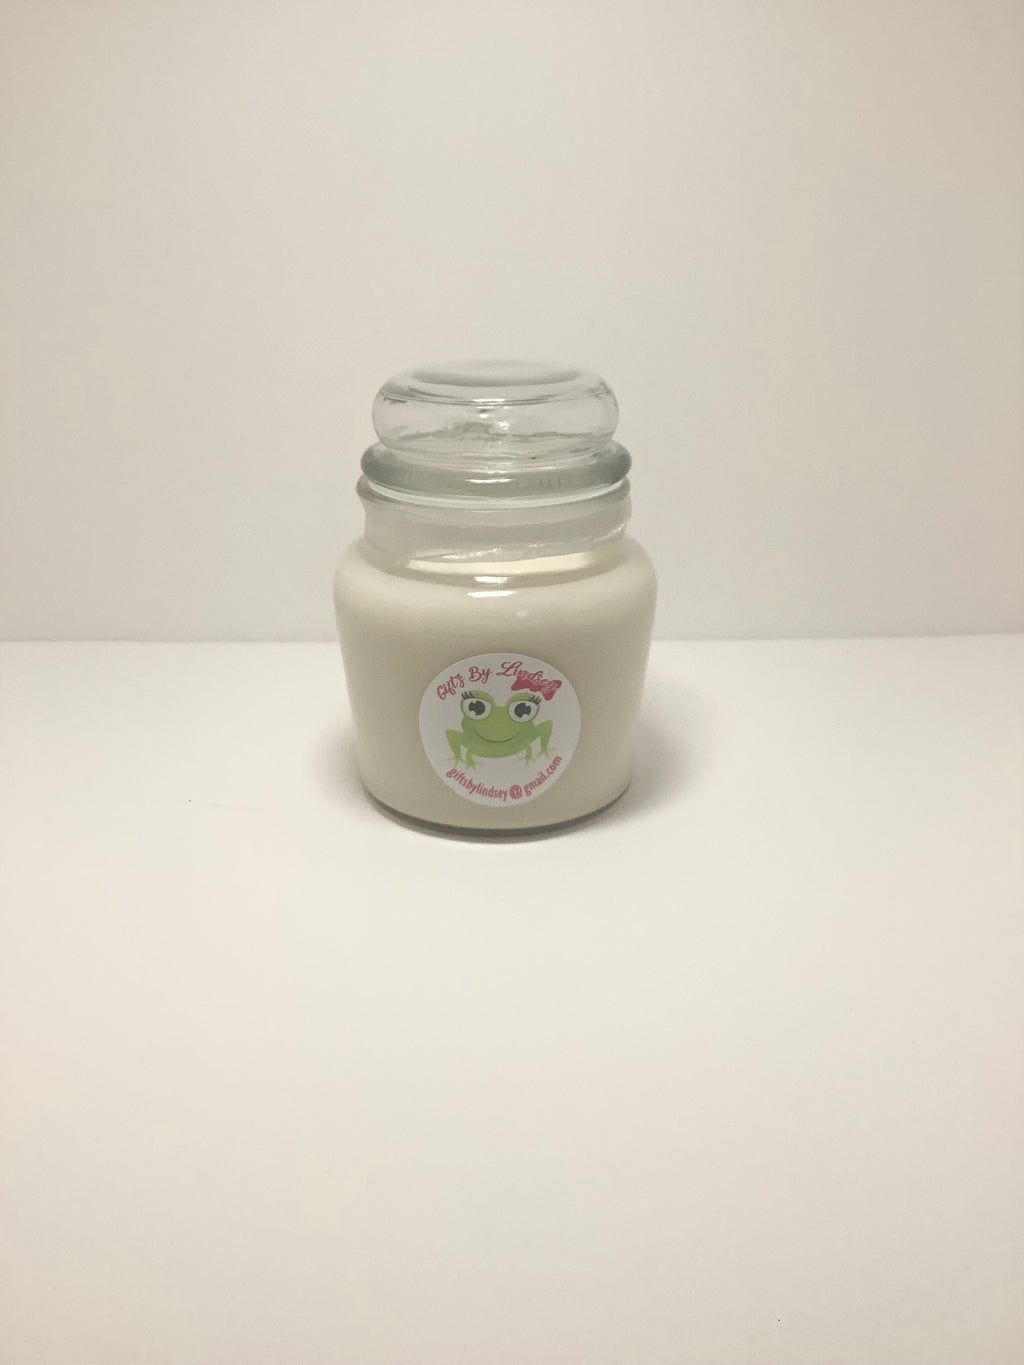 White Peach & Hibiscus soy candle